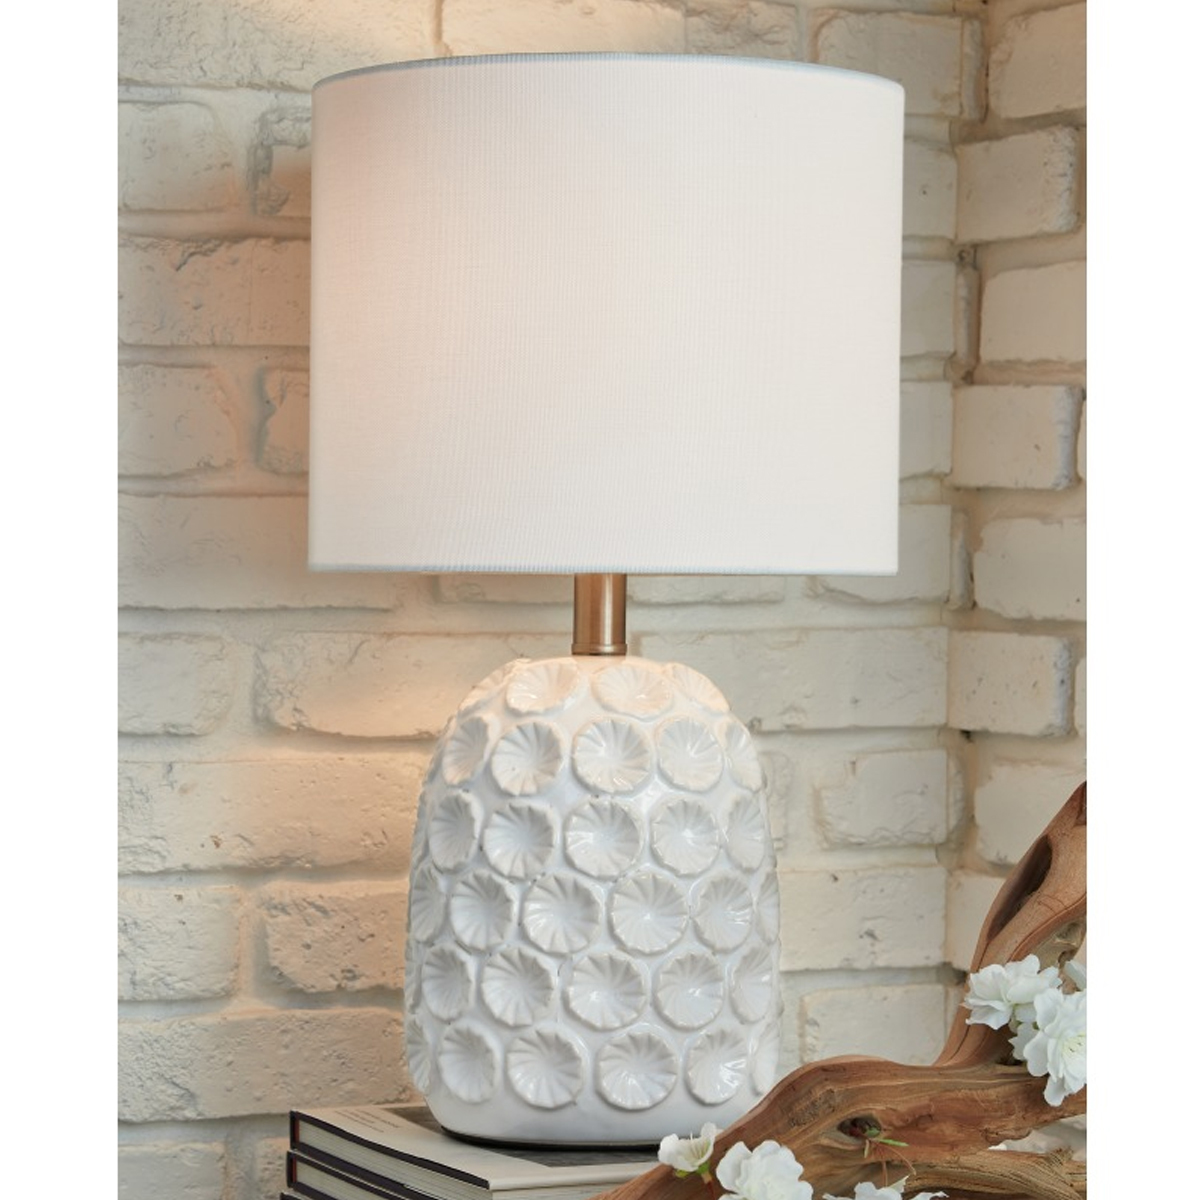 Picture of MOORBANK WHITE TABLE LAMP